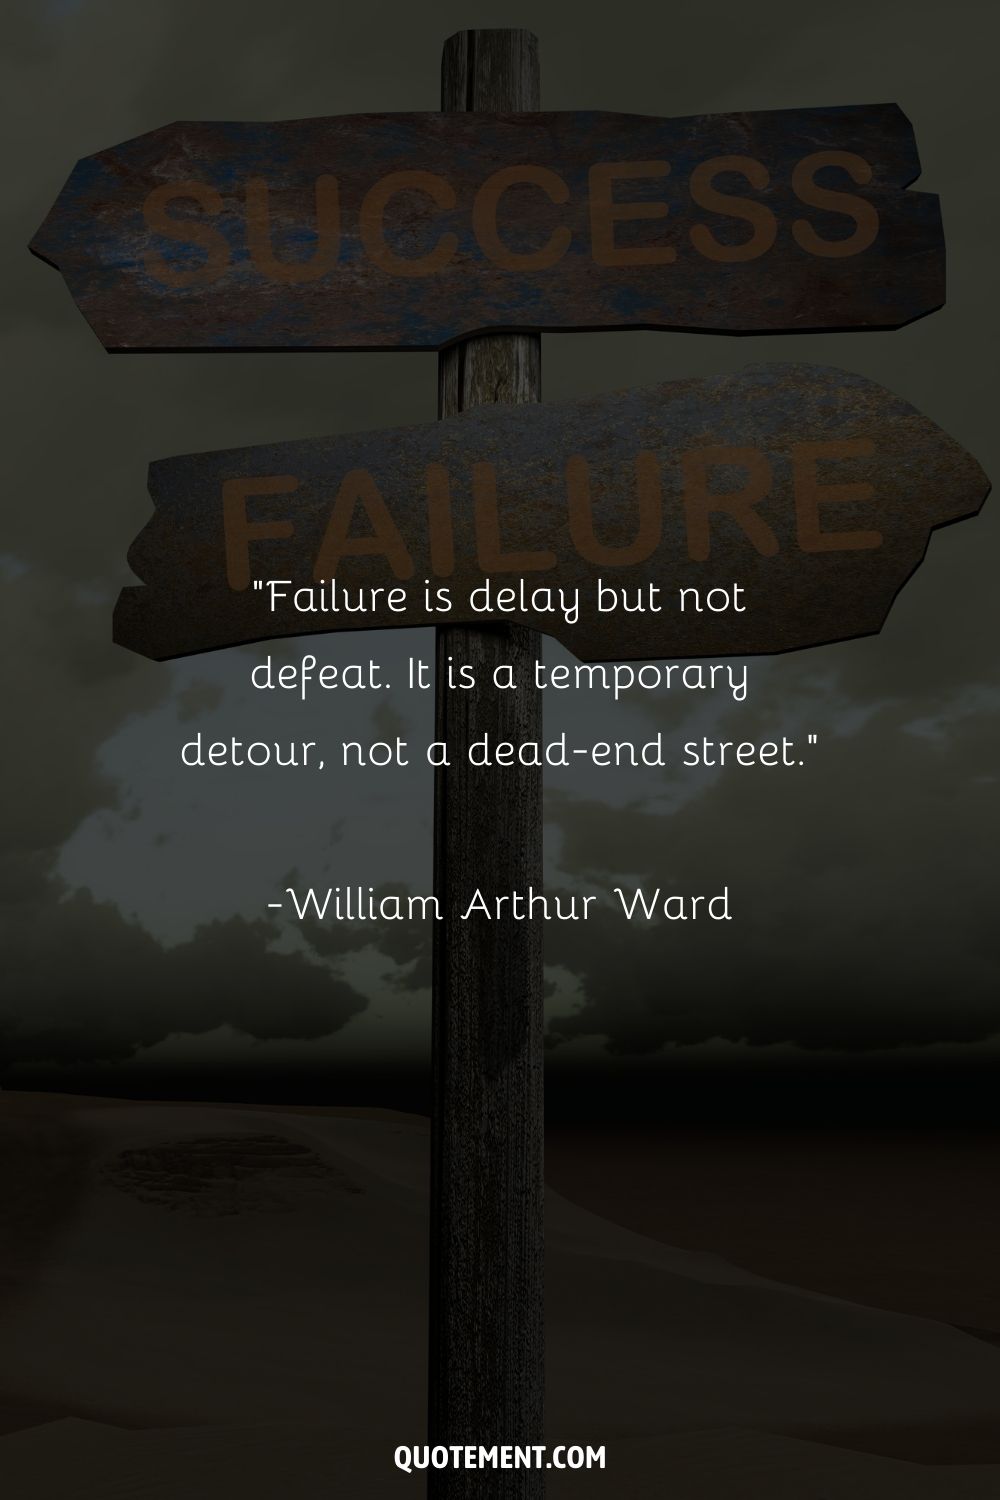 “Failure is delay but not defeat.